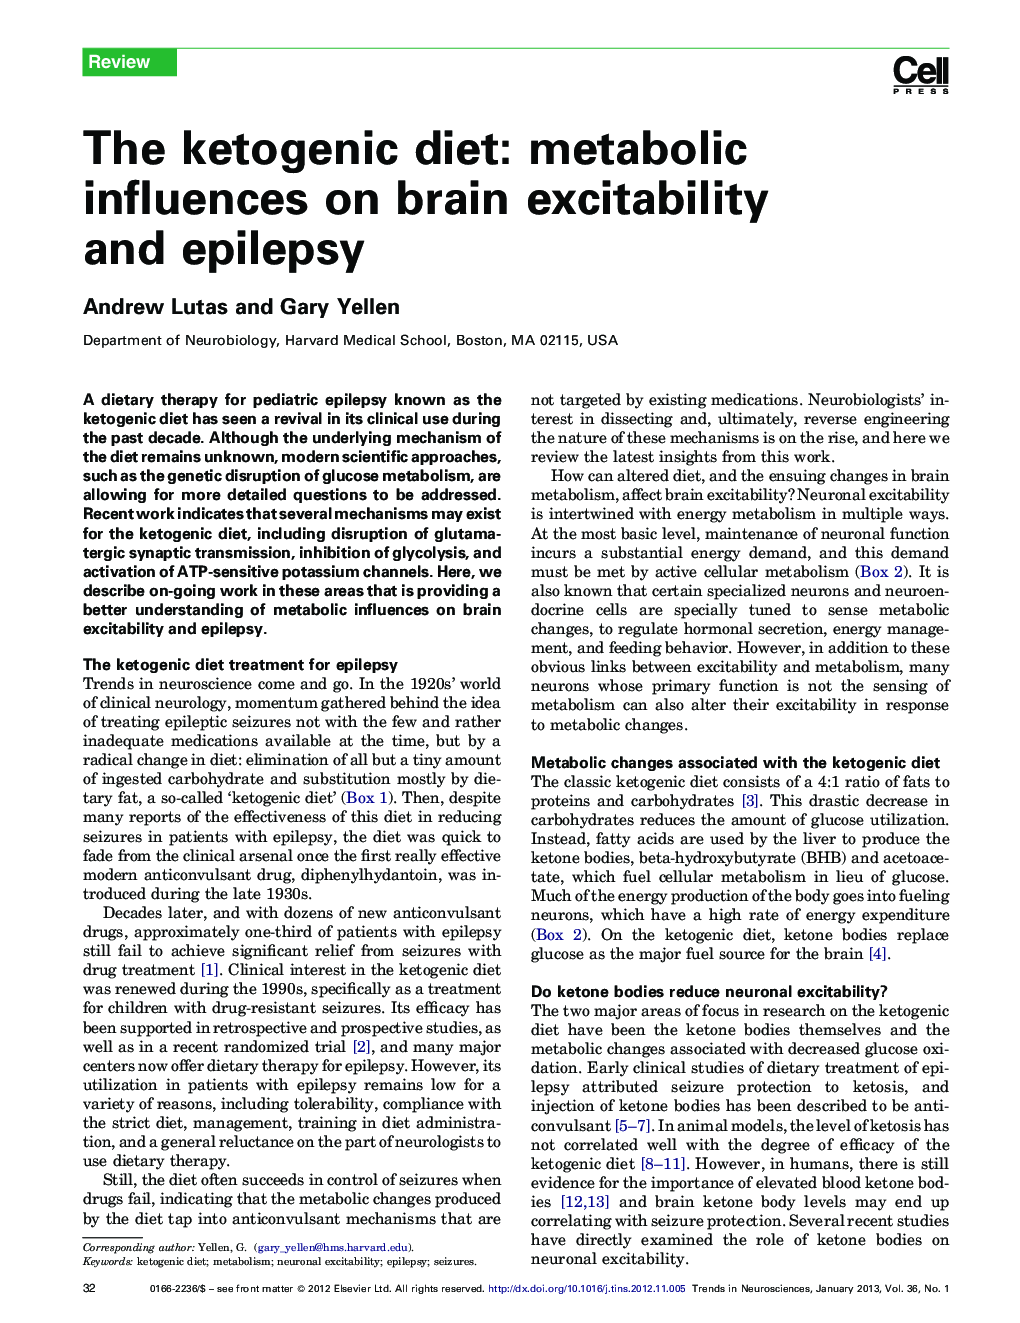 The ketogenic diet: metabolic influences on brain excitability and epilepsy